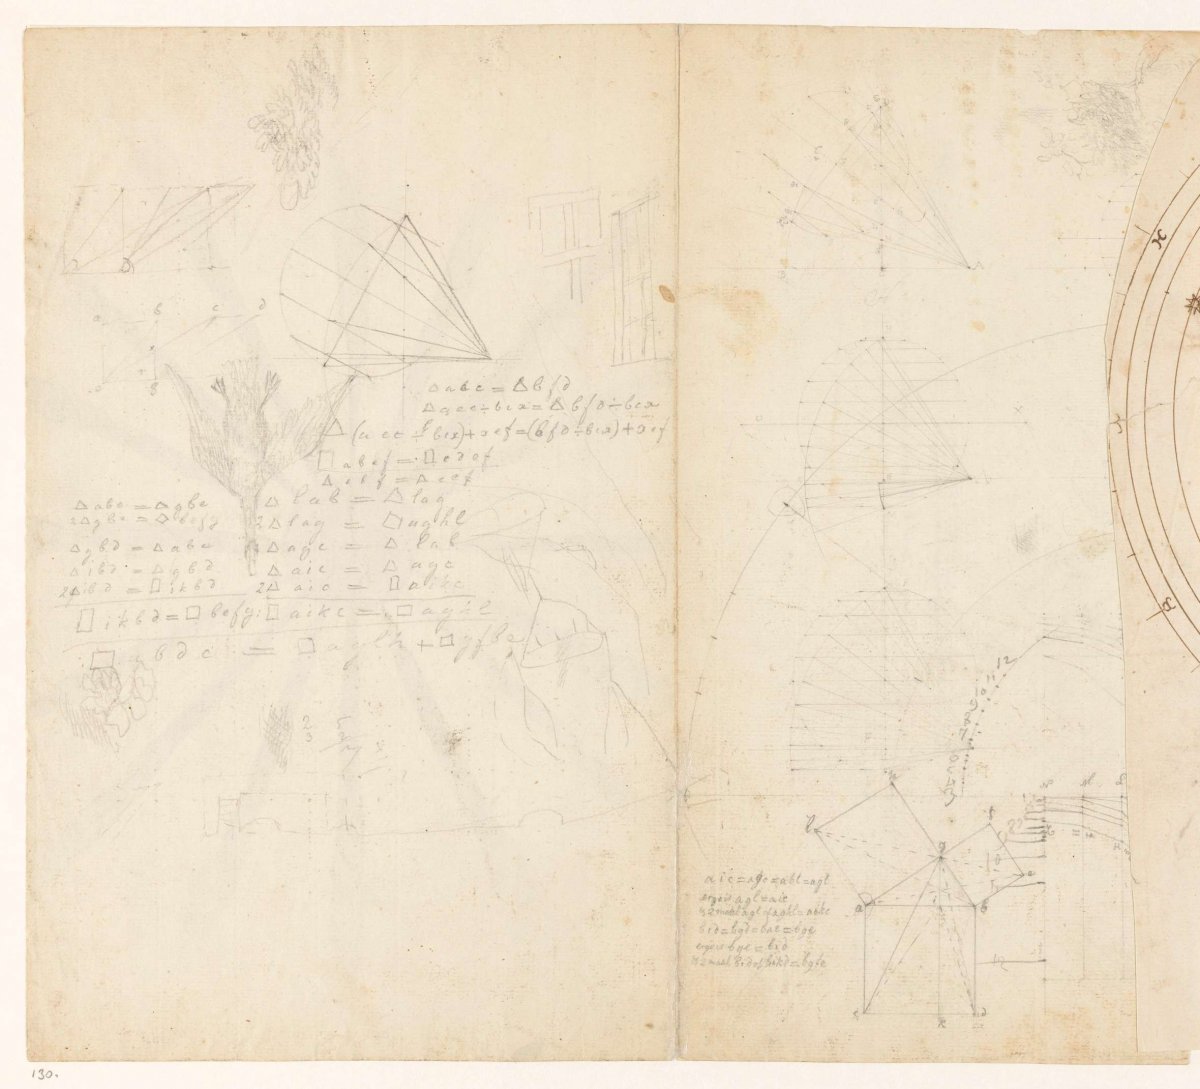 Draft paper with math and sketches, Jan Brandes, 1787 - 1808